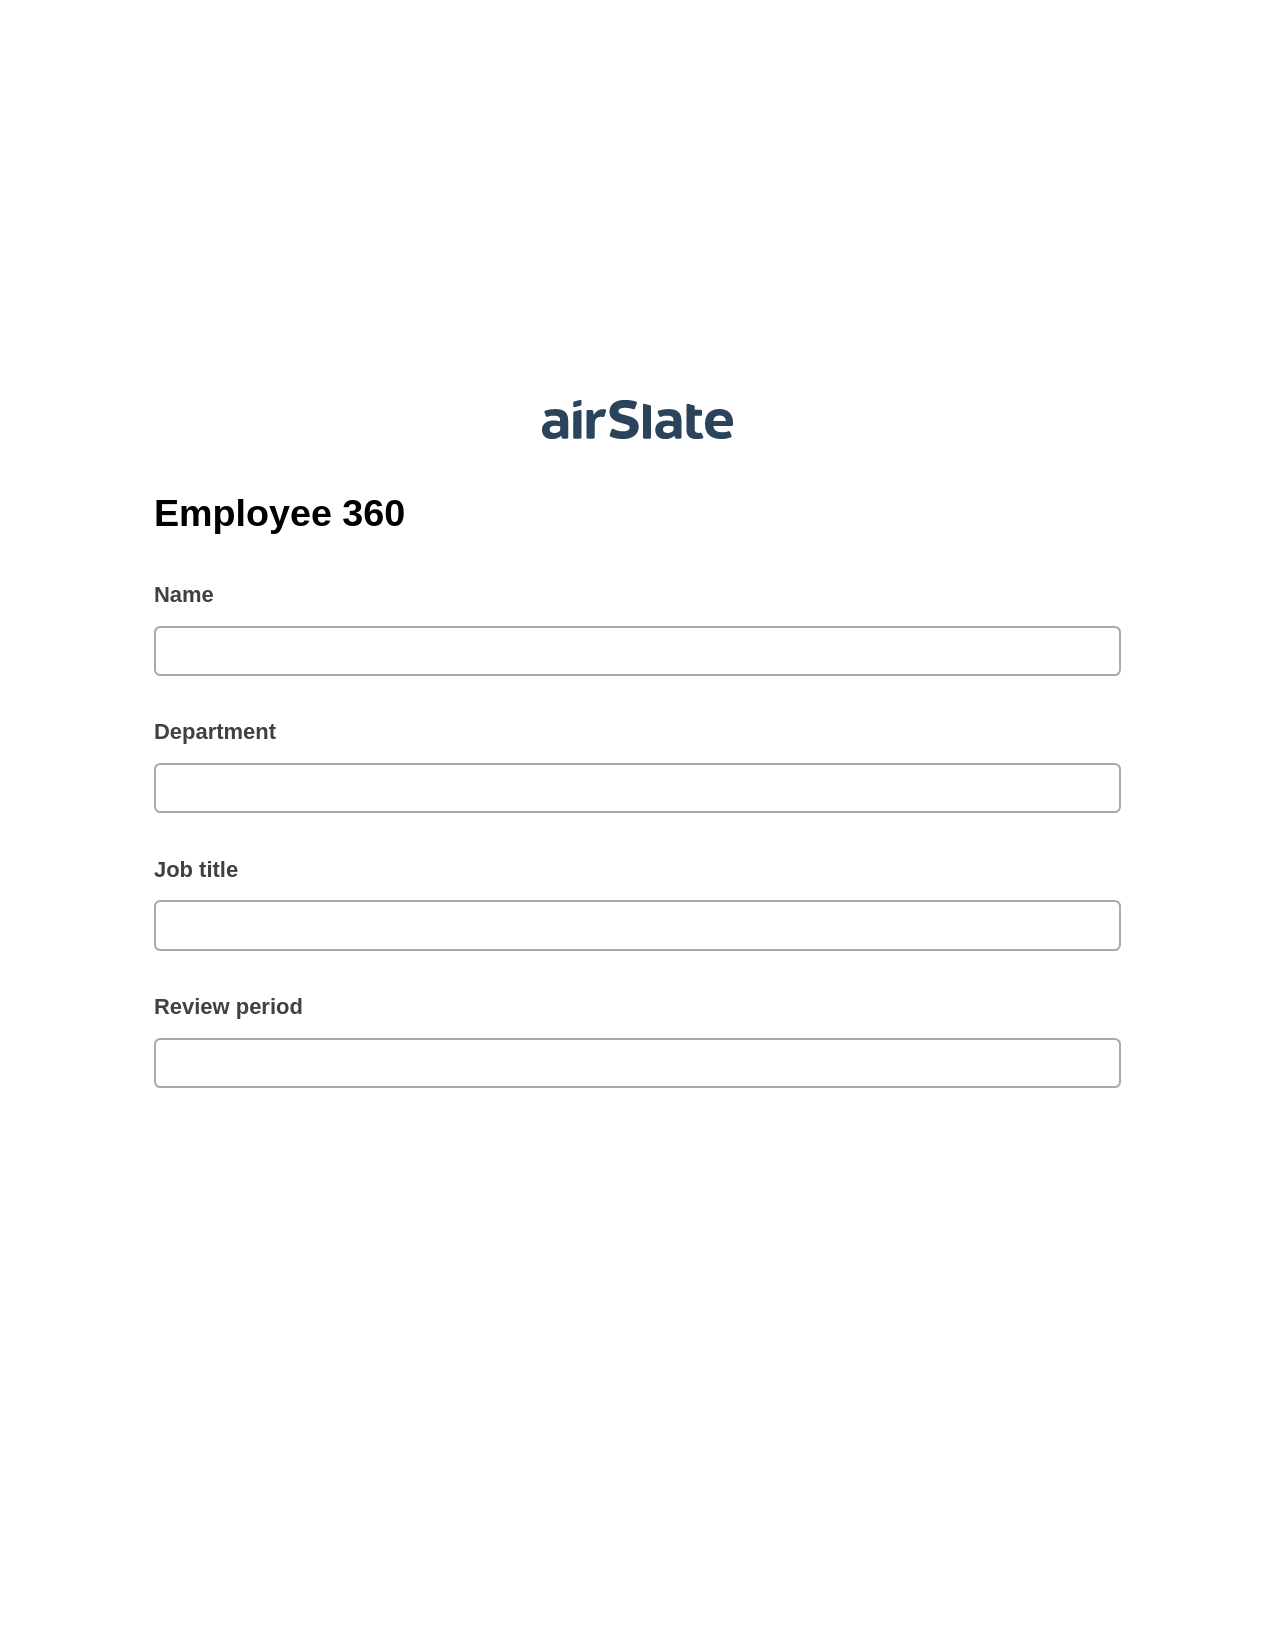 Employee 360 Pre-fill from MySQL Bot, Add Tags to Slate Bot, Export to MySQL Bot